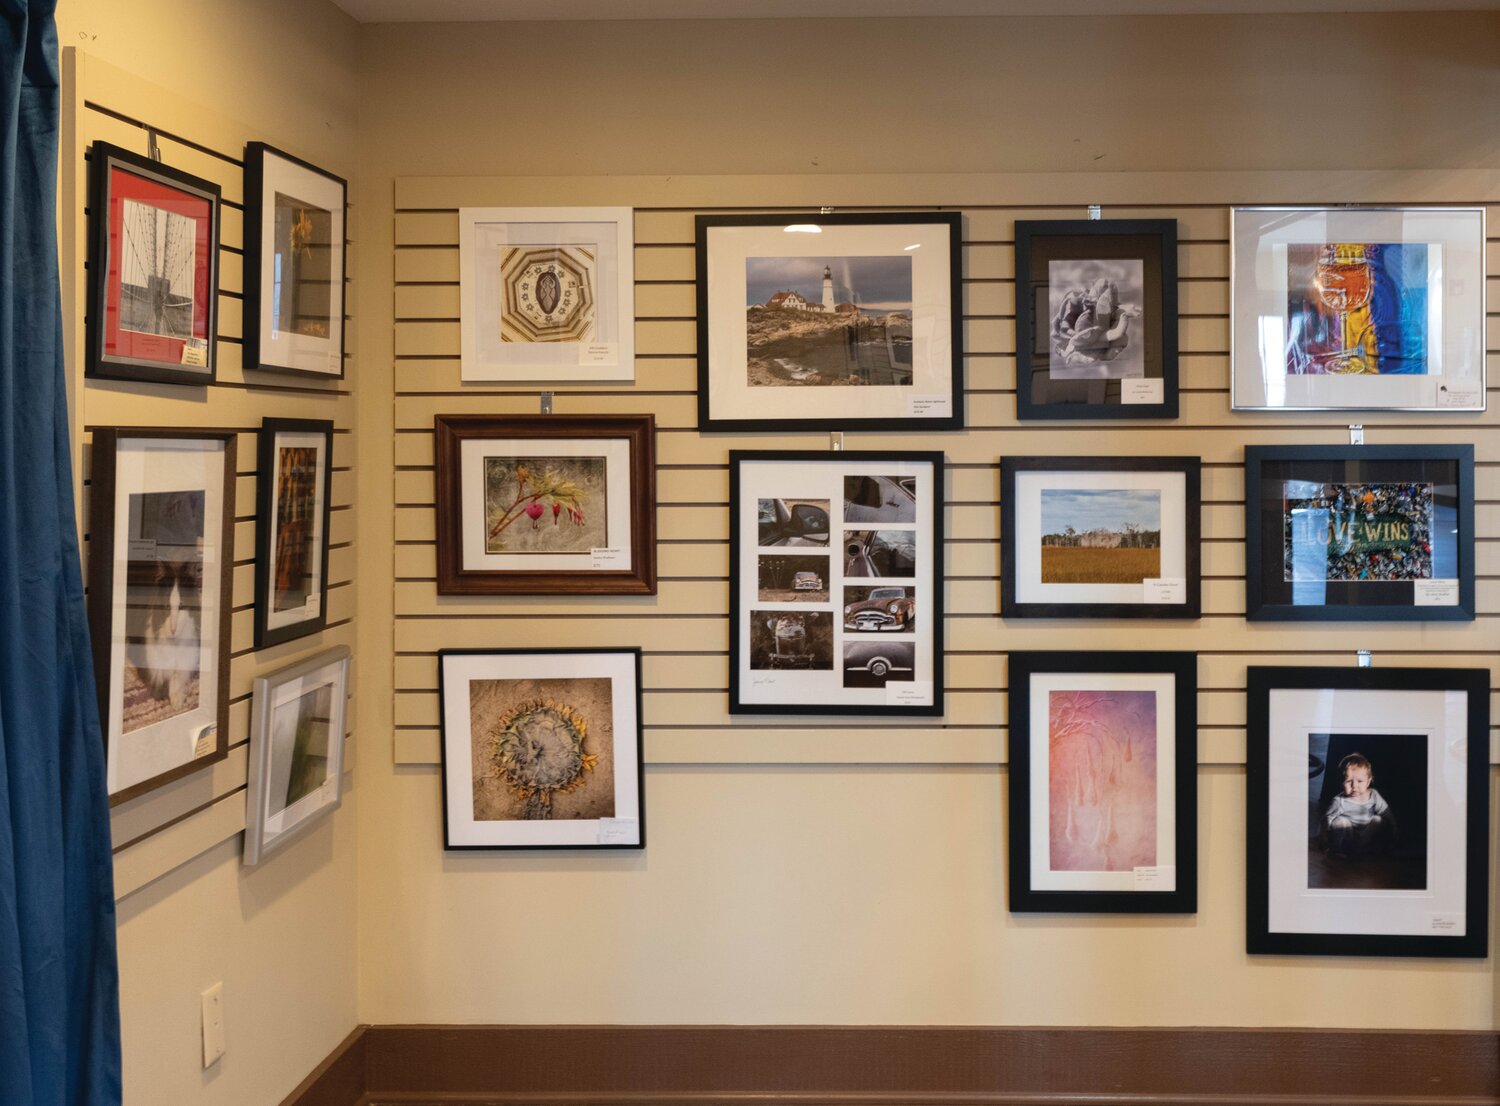 Members of the Doylestown Photo Club are displaying their work this month at the Peddler’s Village visitor center.